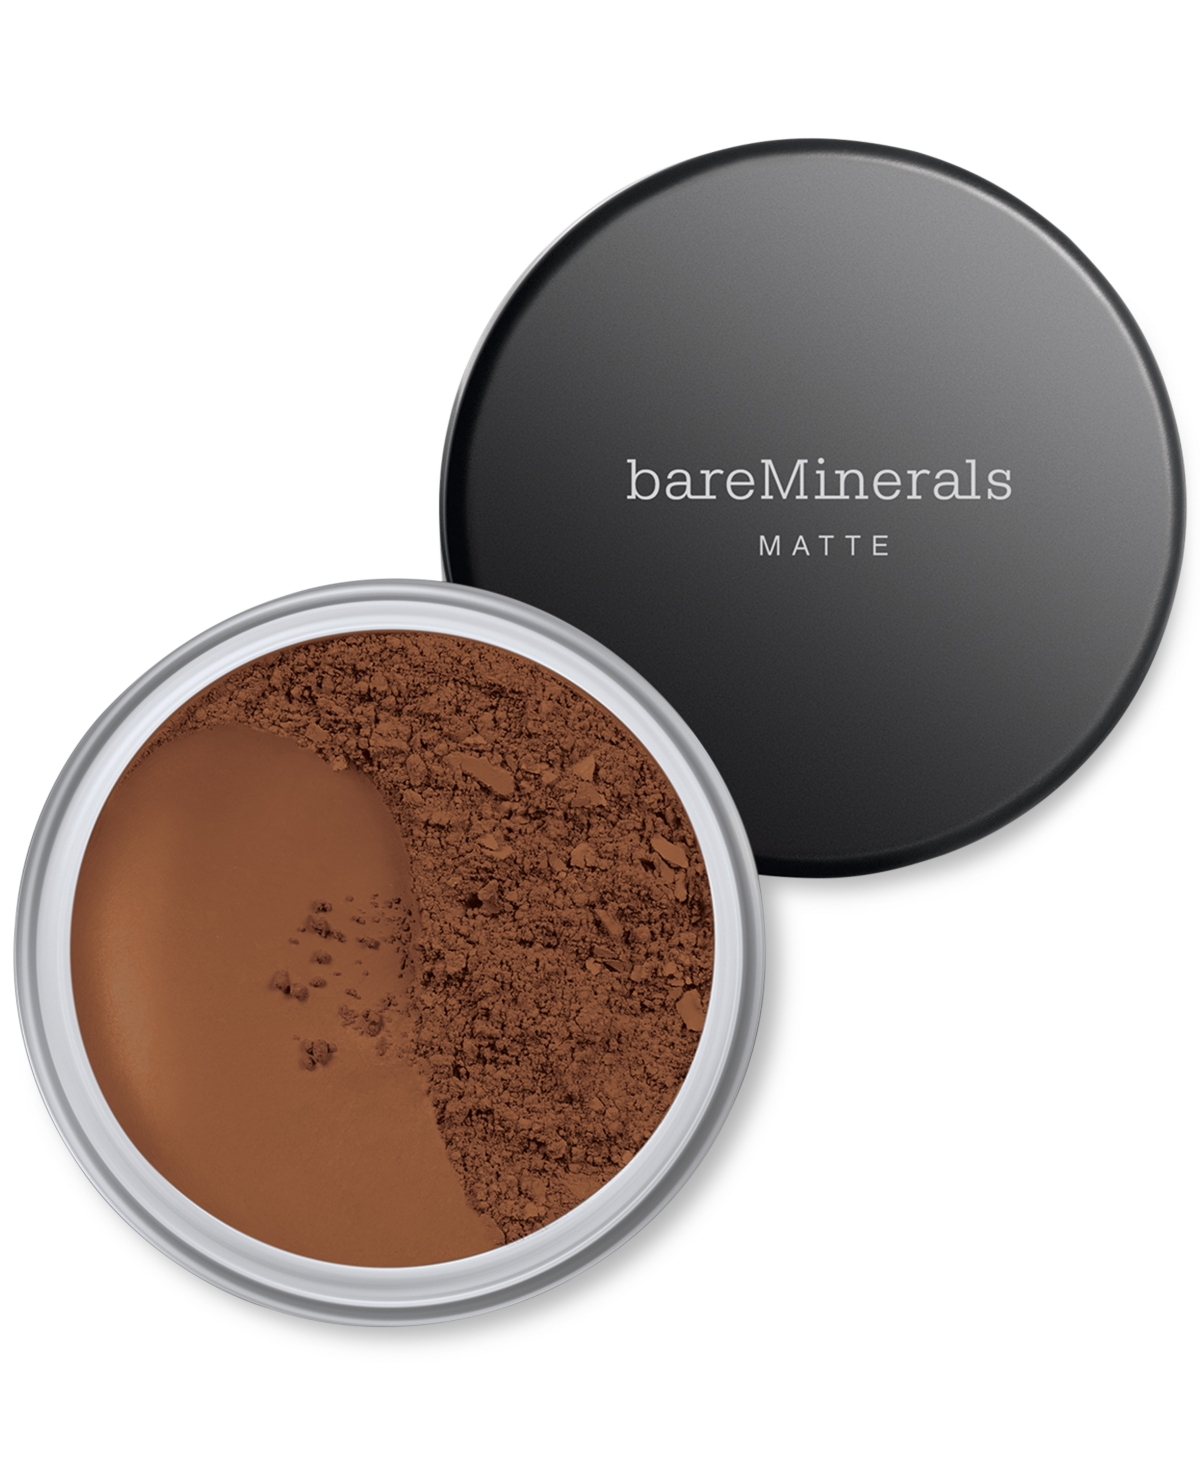 Bareminerals Matte Loose Powder Foundation Spf 15 In Deepest Deep  - For Deepest Skin With Co